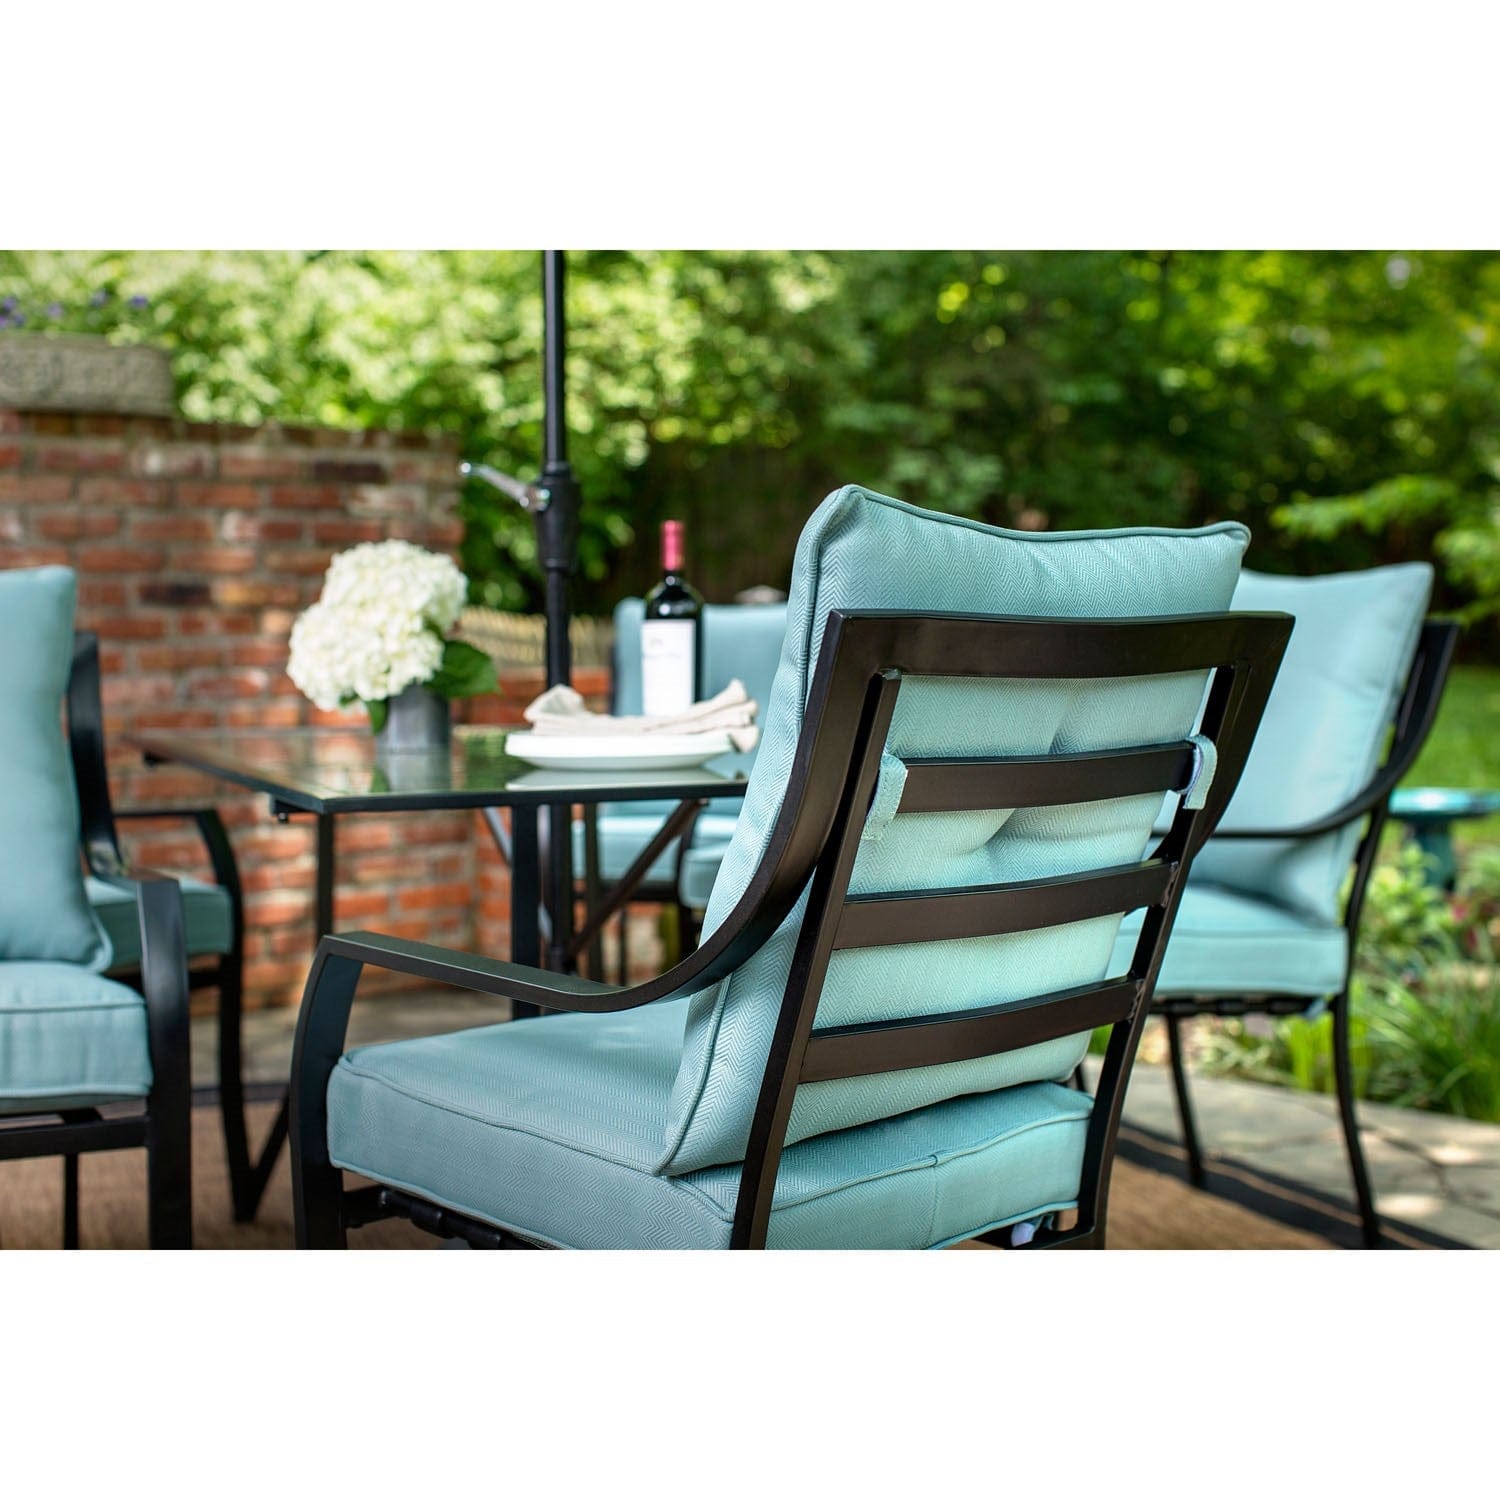 Hanover Outdoor Dining Set Hanover - 7 Piece Dining Set | 6 Stationary Chairs | 1 Dining Table | Gray/Ocean Blue | LAVDN7PC-BLU